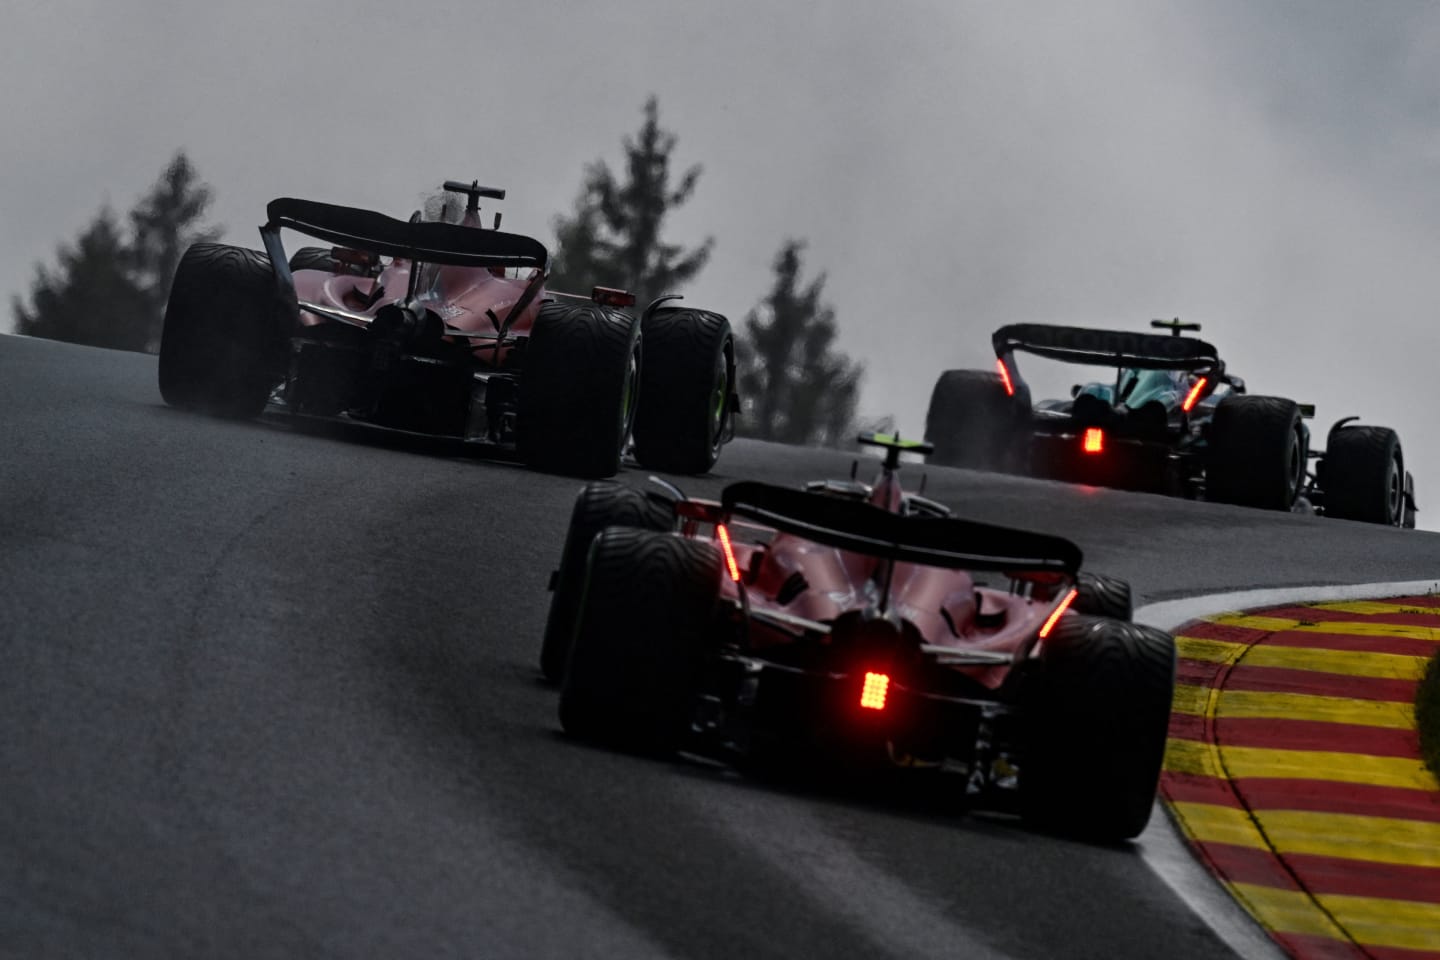 Ferrari's Monegasque driver Charles Leclerc (L), Ferrari's Spanish driver Carlos Sainz Jr (down) and Mercedes' British driver Lewis Hamilton (R) compete during the sprint shootout ahead of the Formula One Belgian Grand Prix at the Spa-Francorchamps Circuit in Spa on July 29, 2023. (Photo by JOHN THYS / AFP) (Photo by JOHN THYS/AFP via Getty Images)